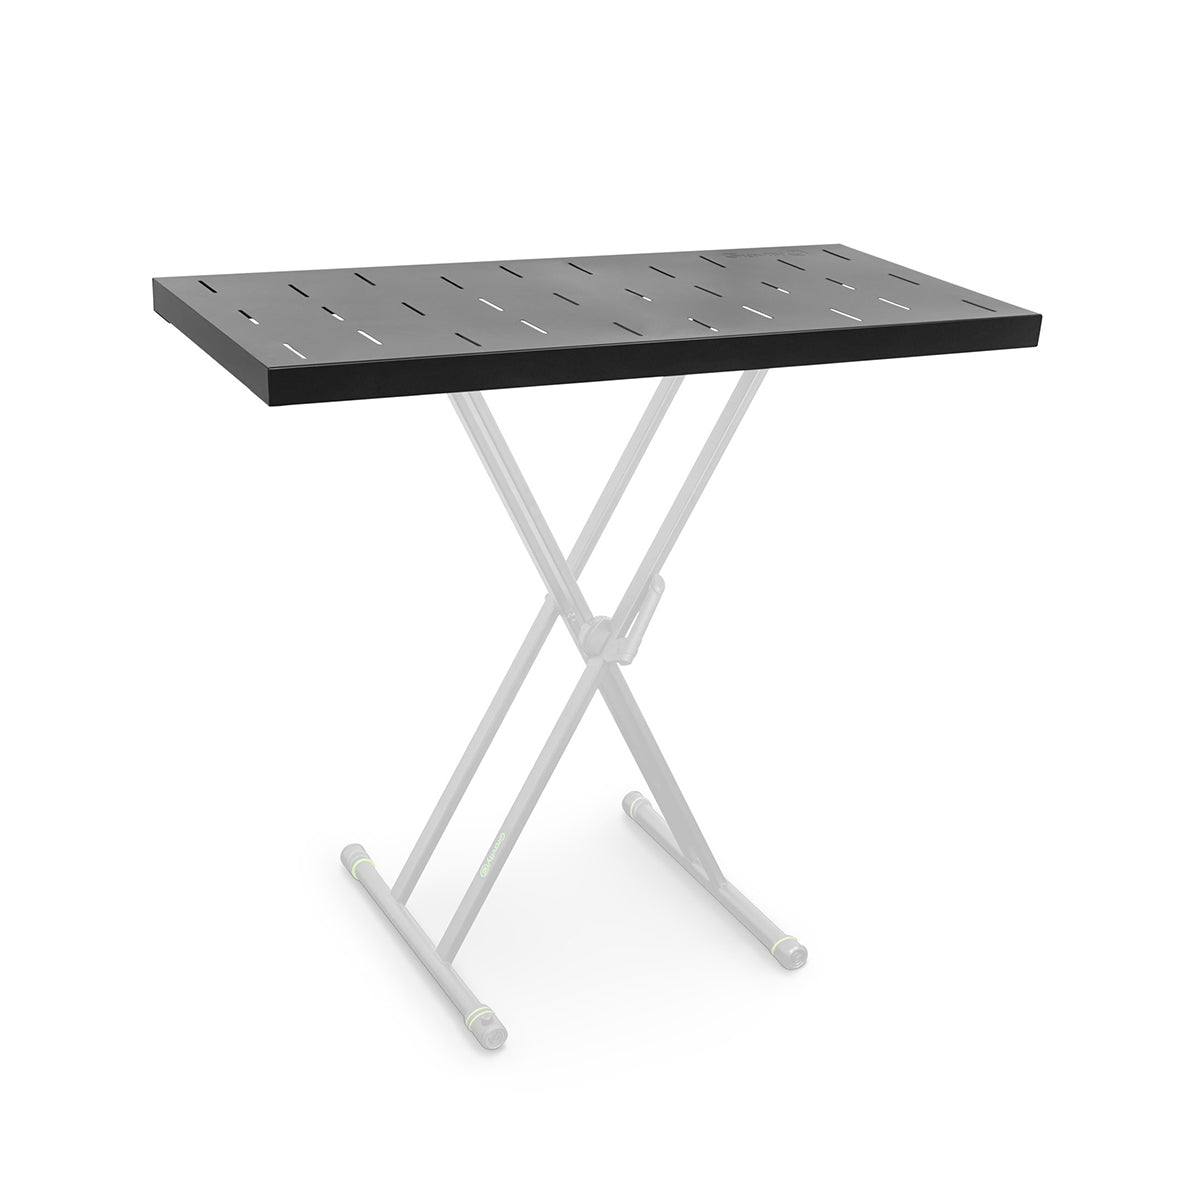 Gravity KS-RD1 Rapid Desk for X-Type Keyboard Stands